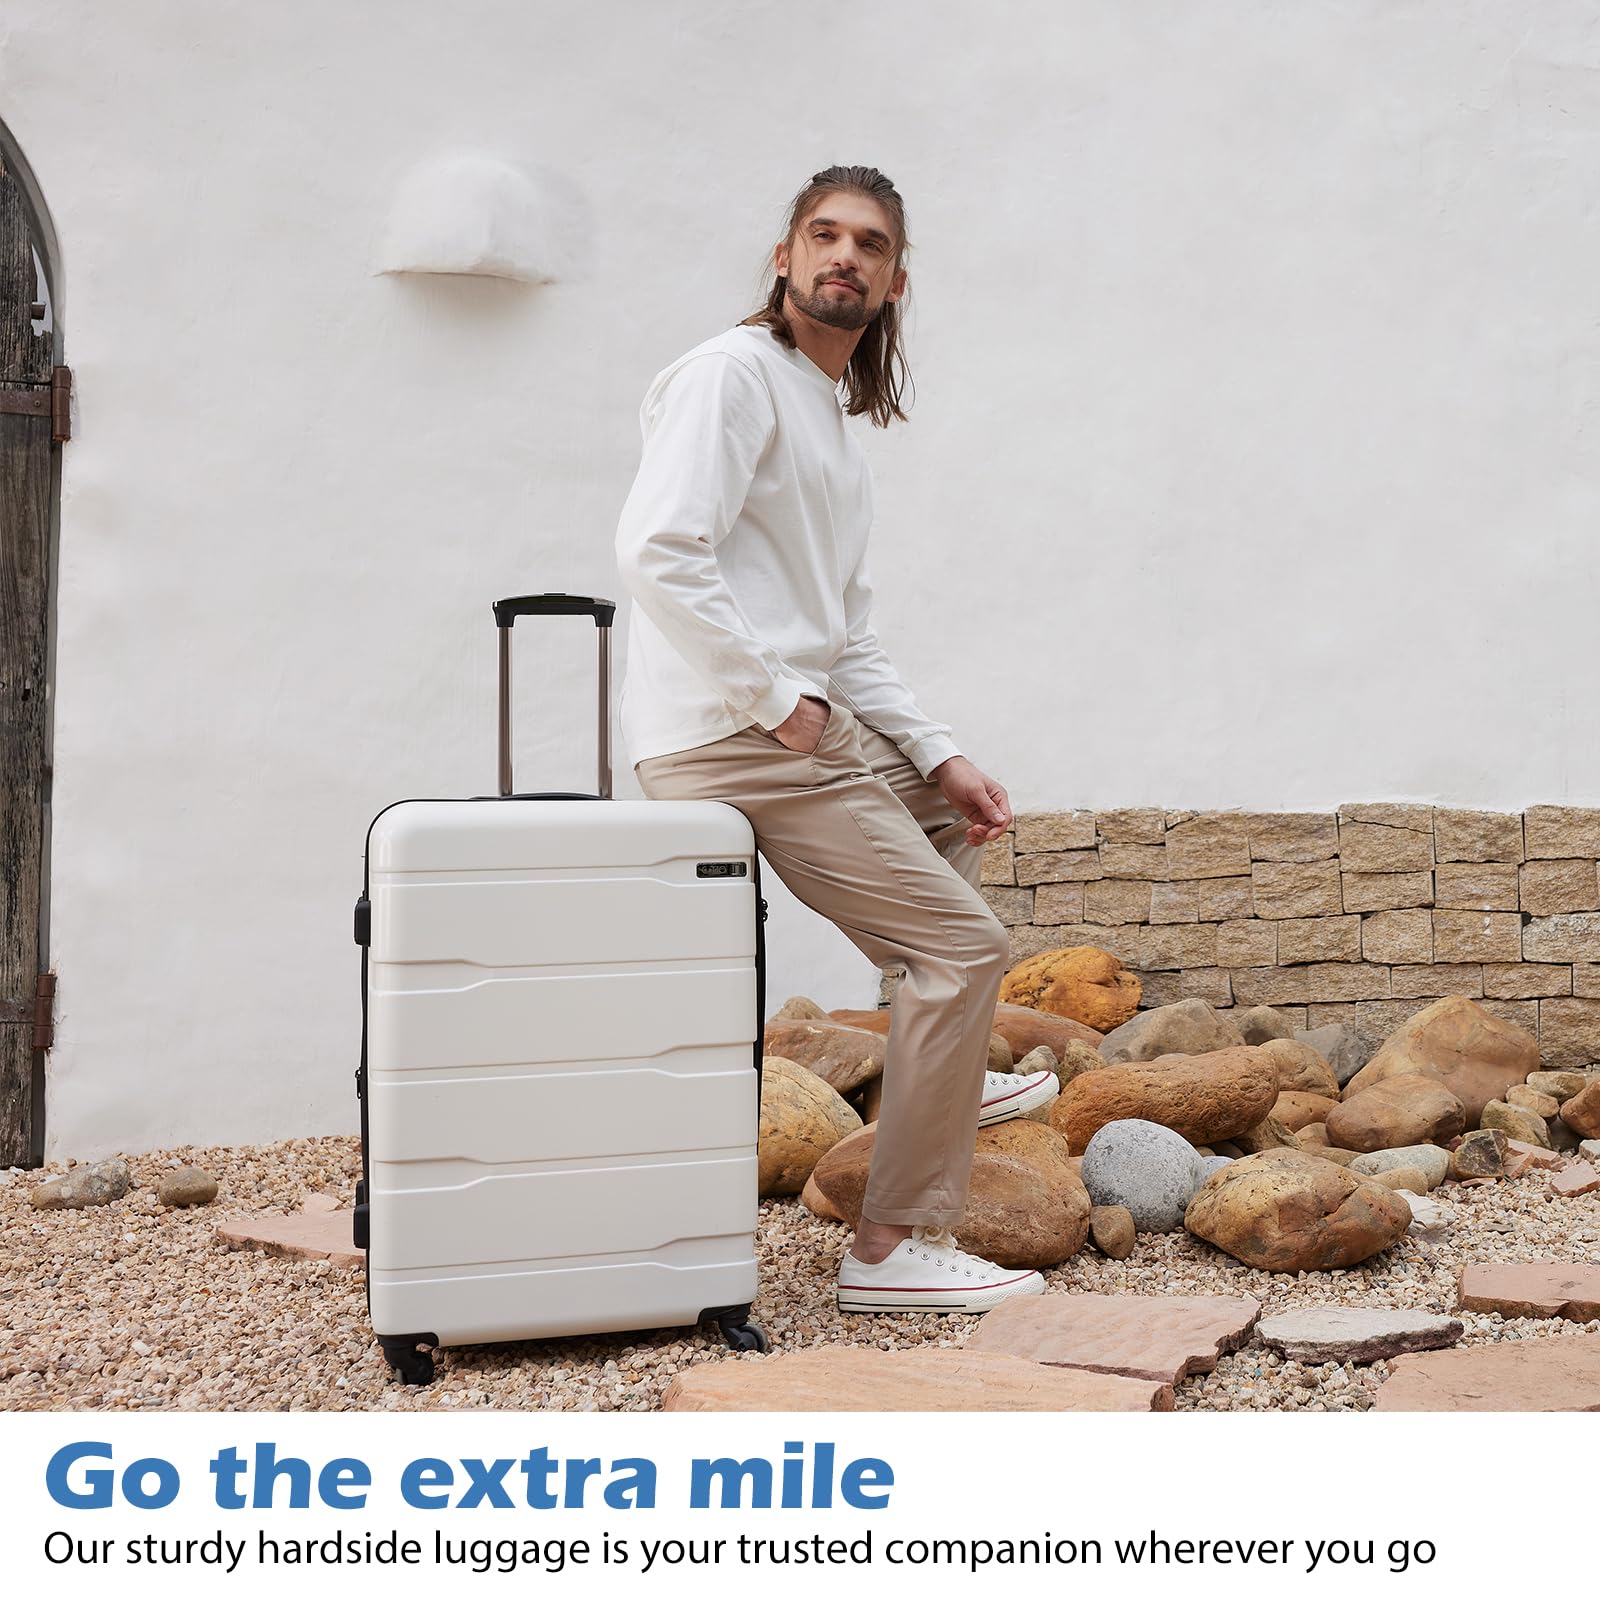 Coolife Luggage Expandable(only 28